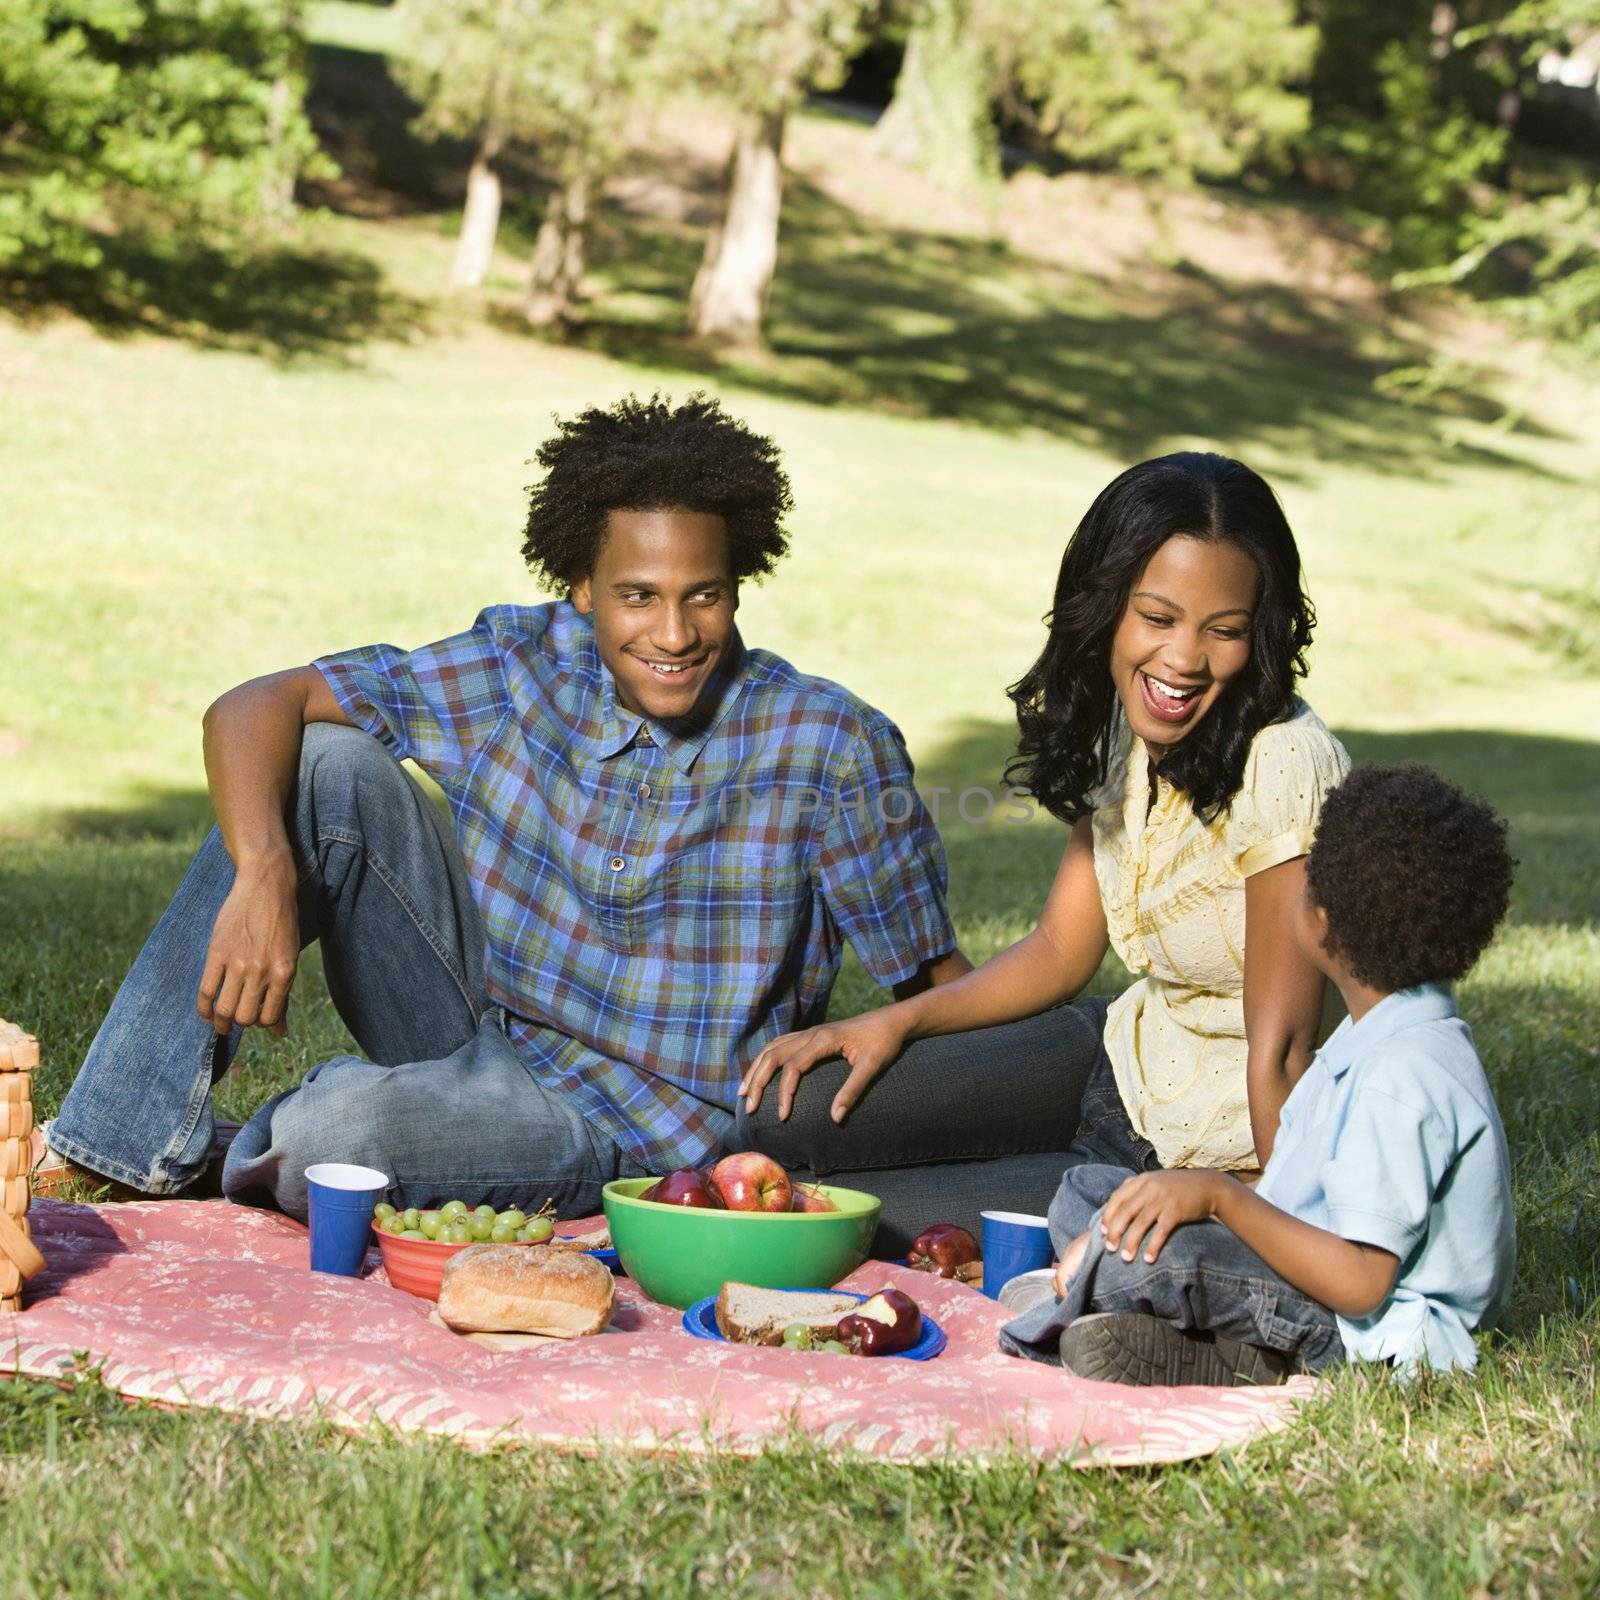 Smiling happy parents and son having picnic in park.